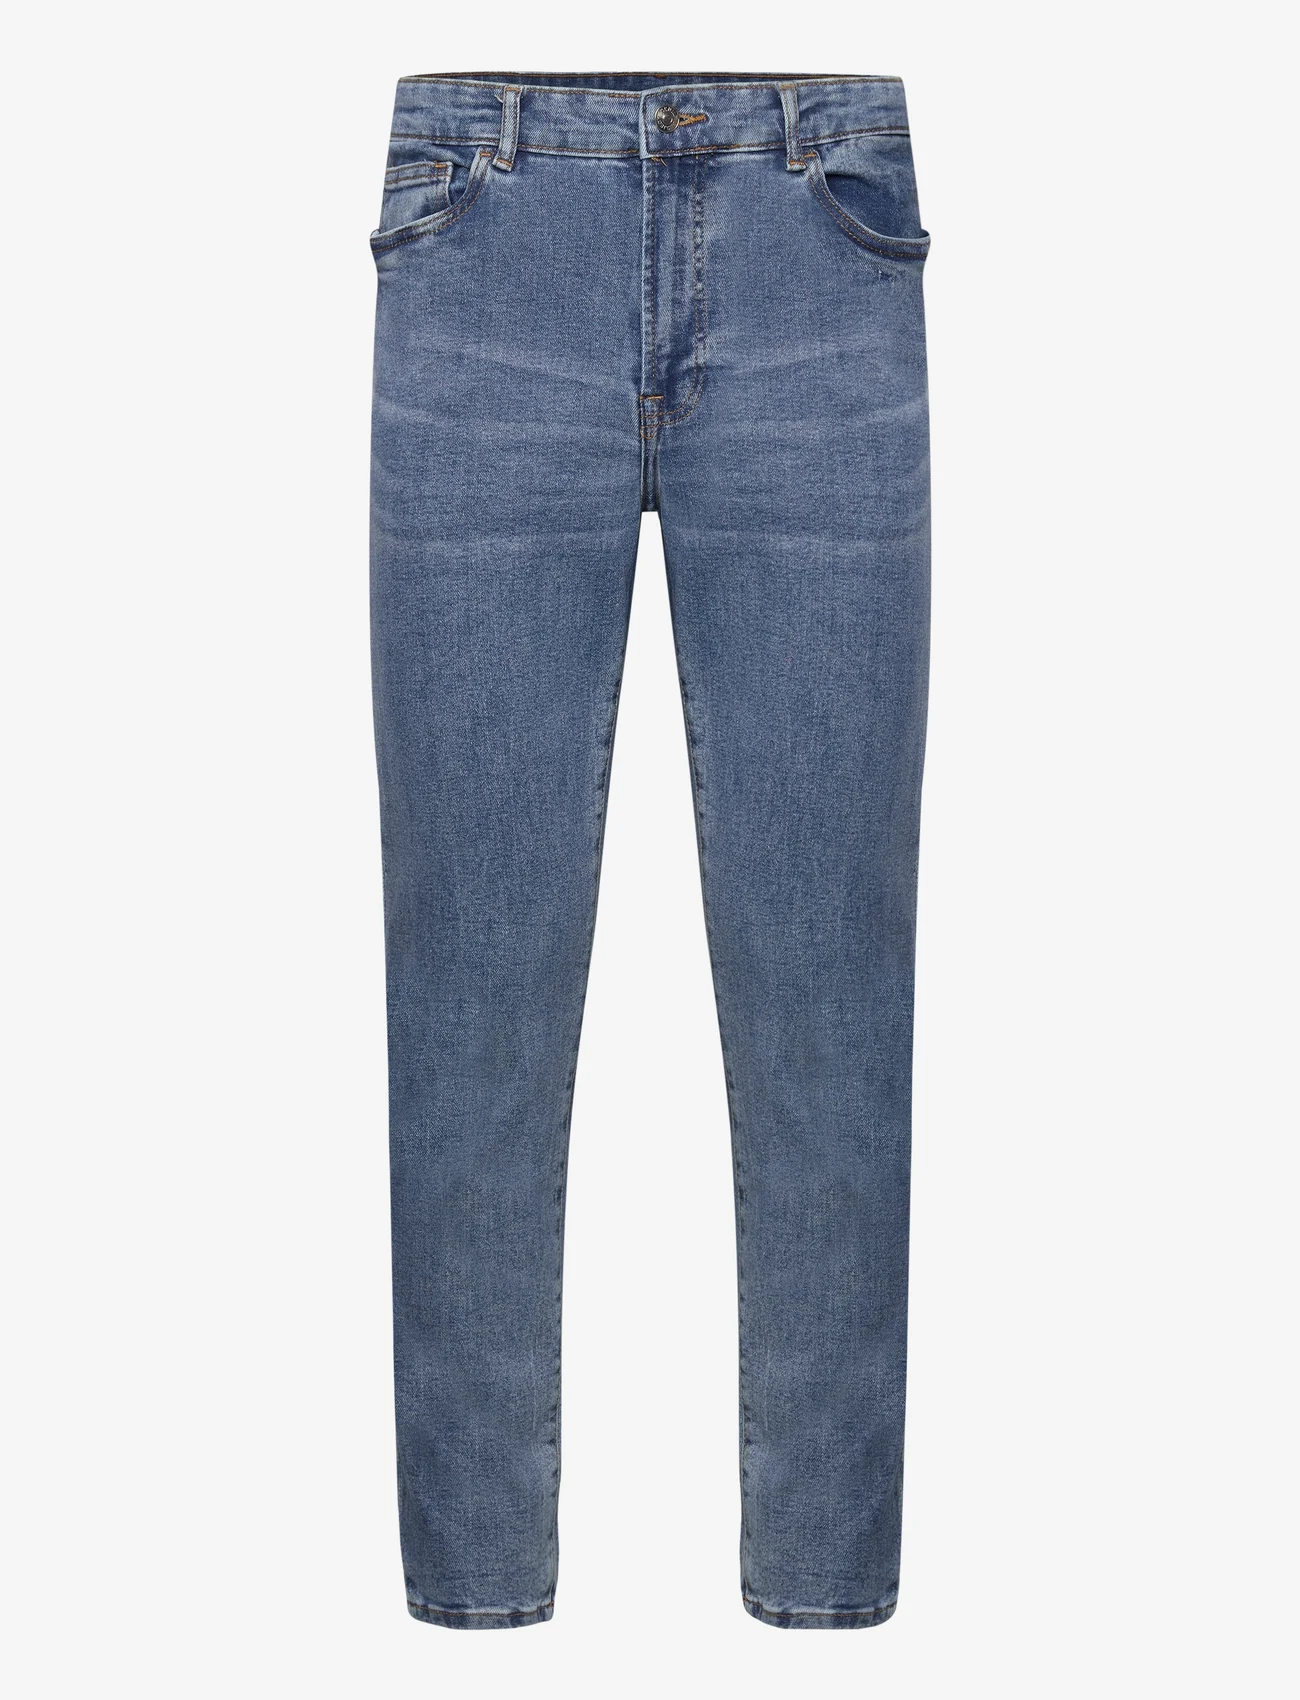 Denim project - DPRecycled Loose Jeans - relaxed jeans - medium stone wash - 0